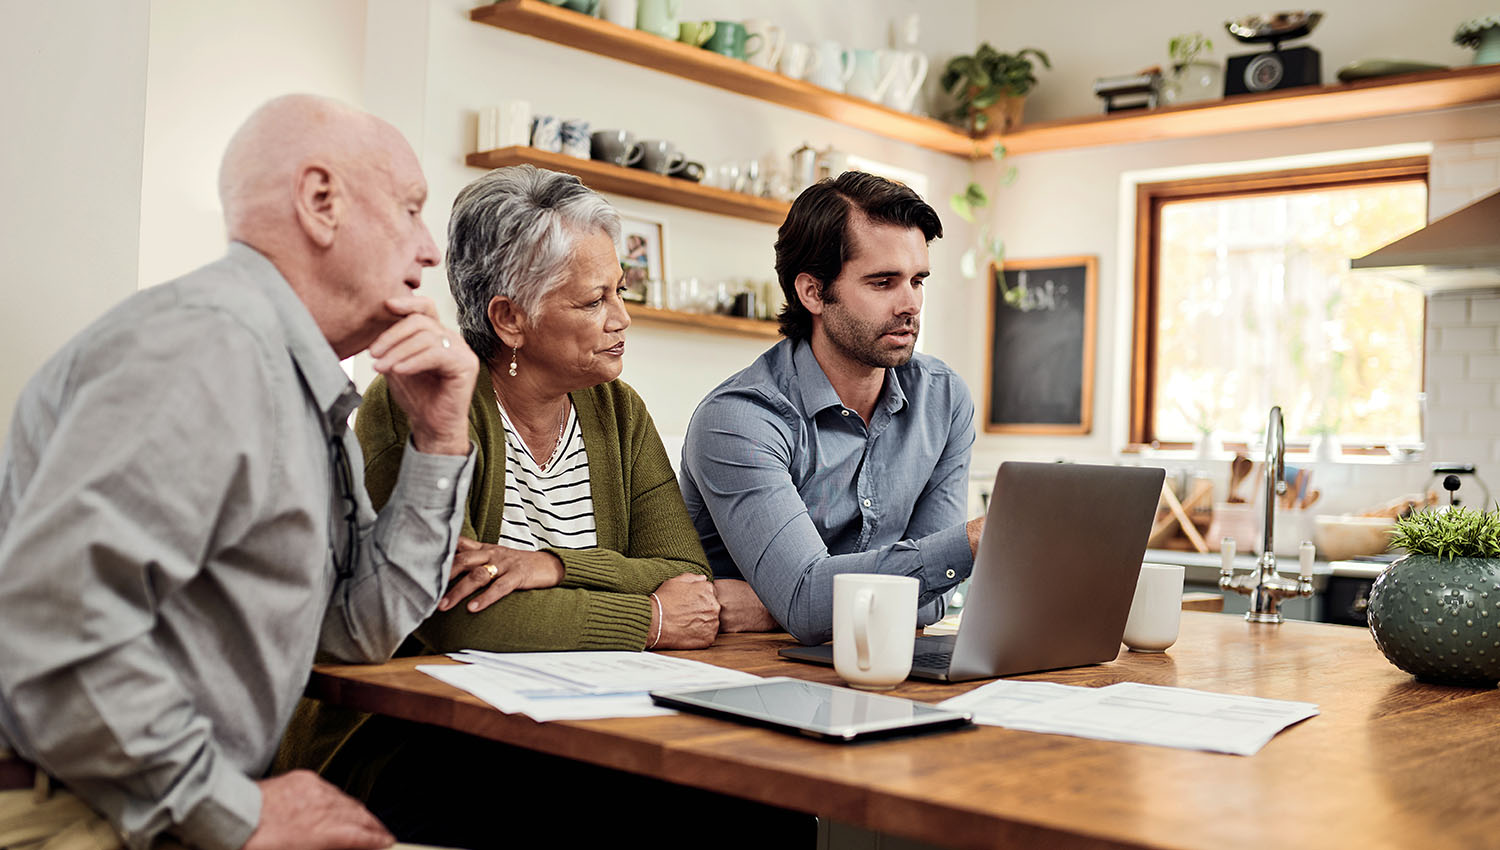 A family with elderly parents in a livingroom looking at documents together